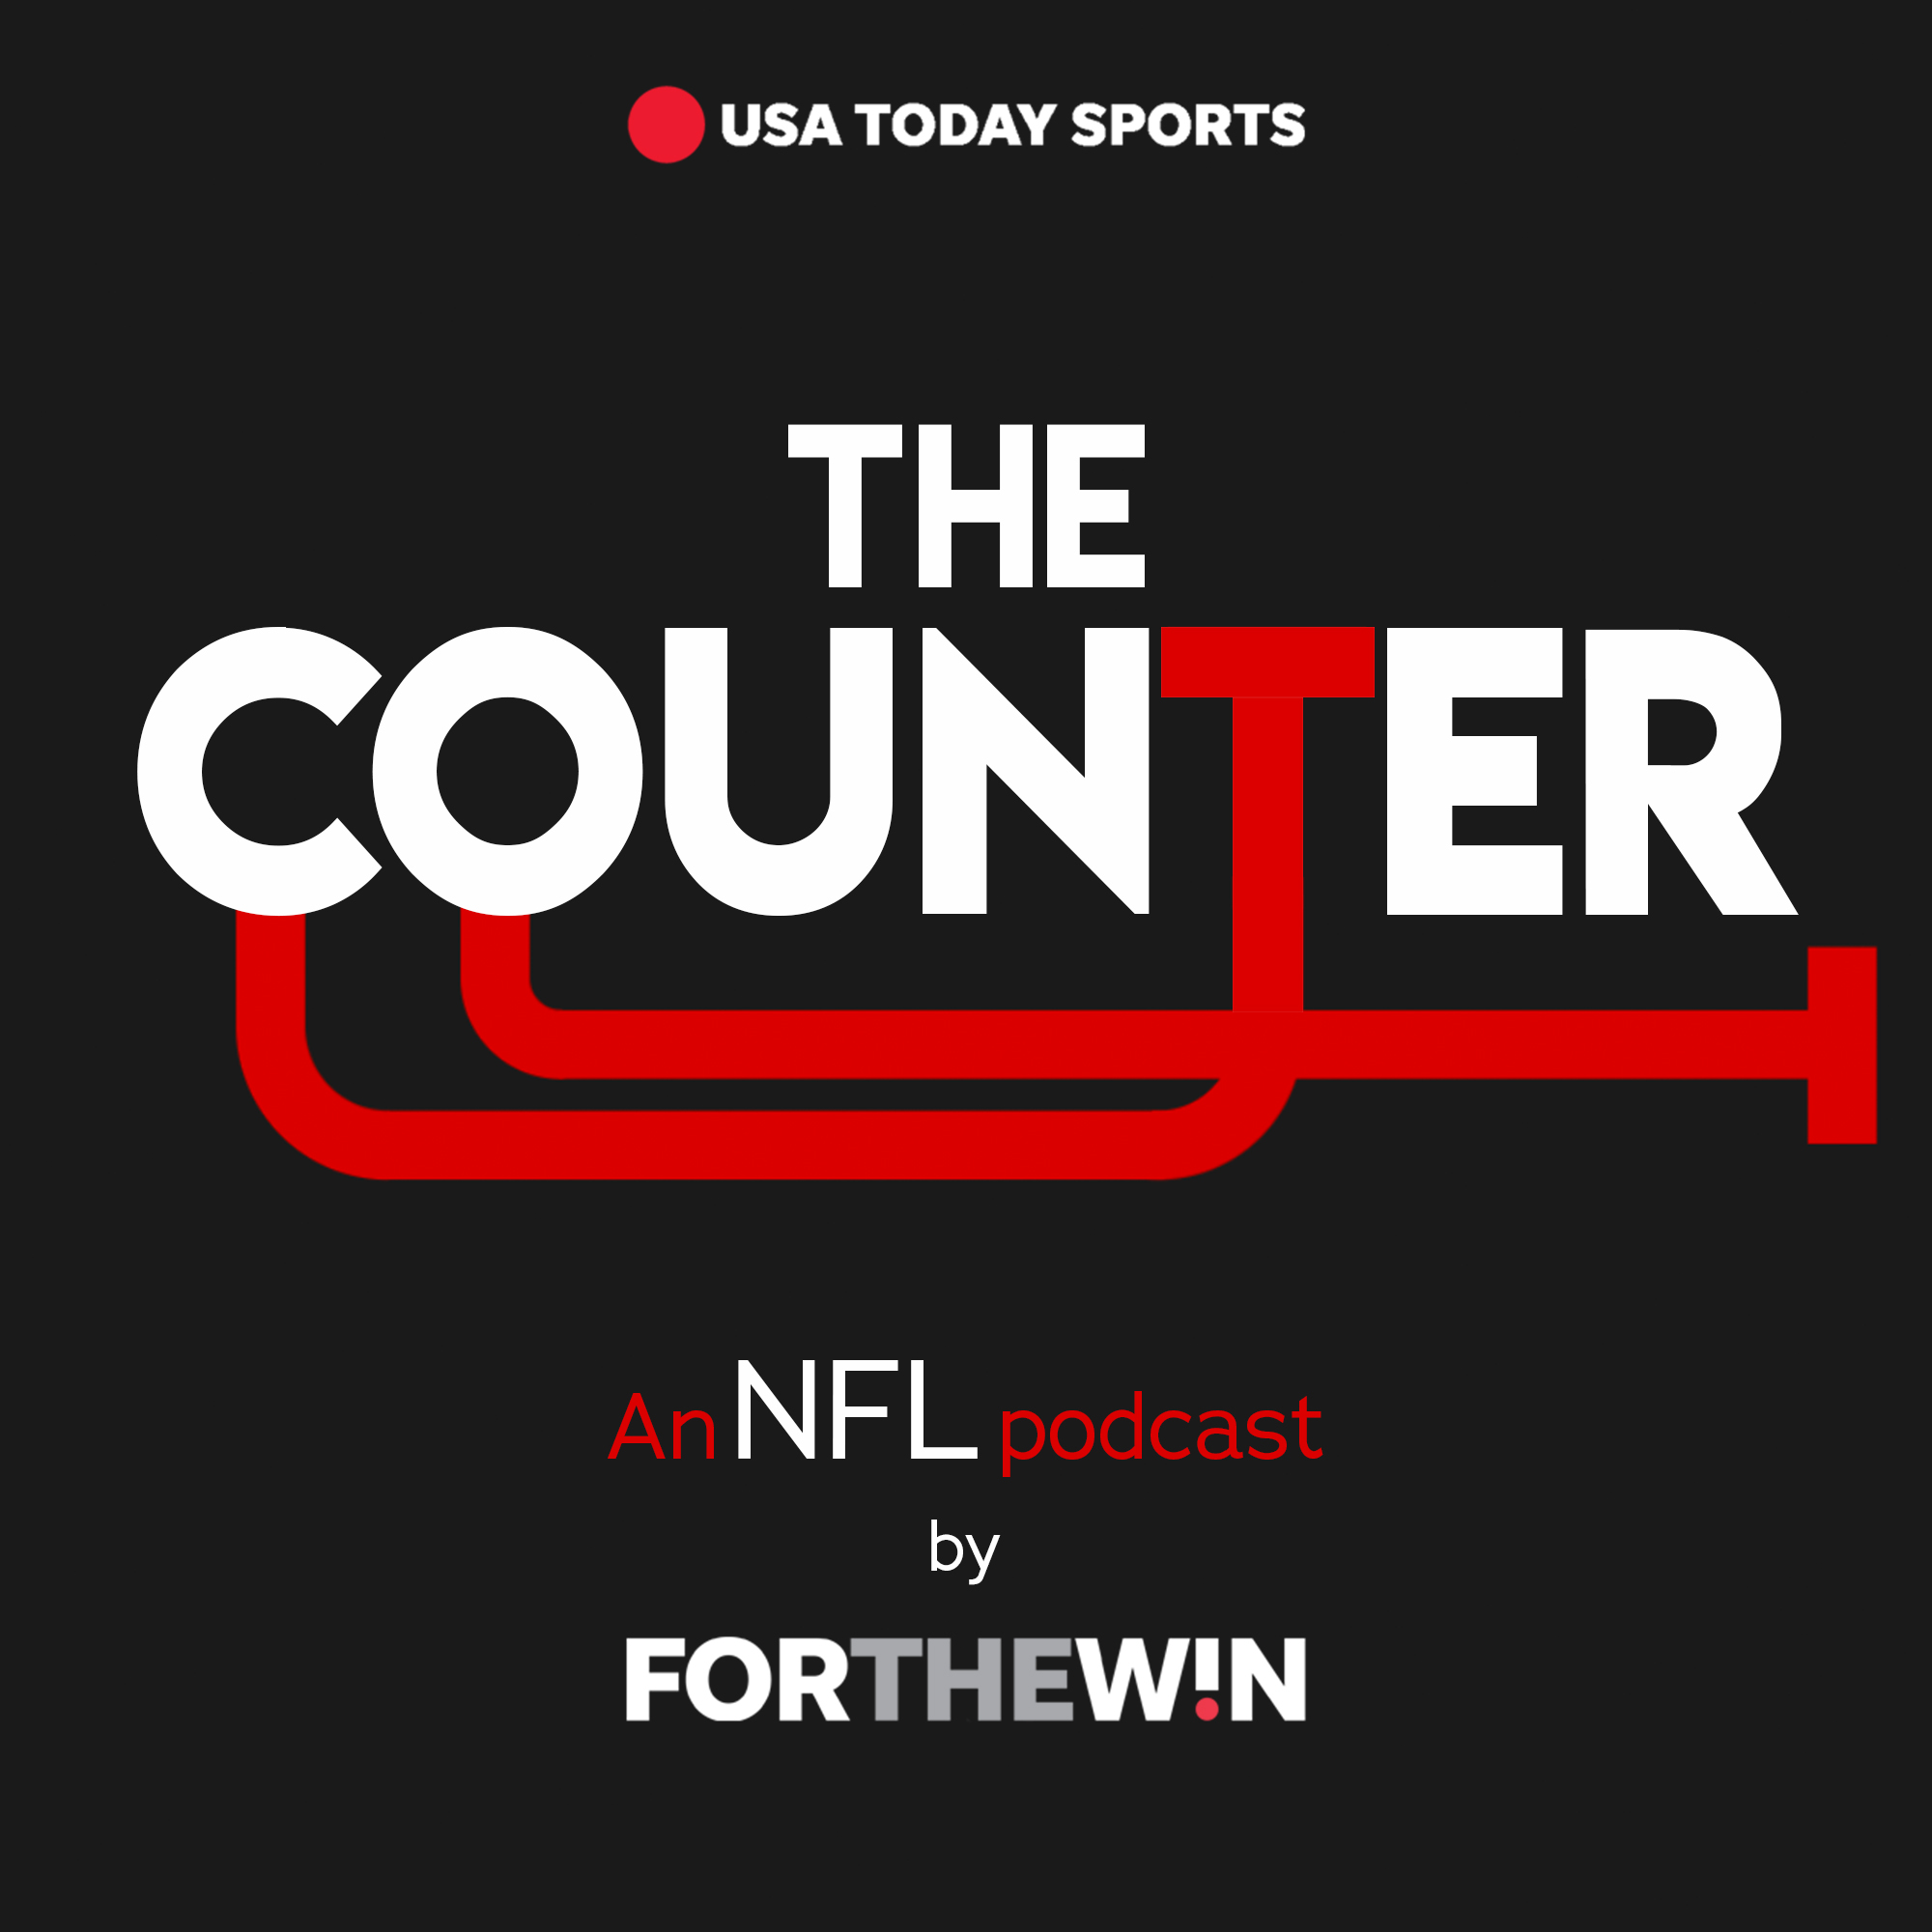 The Counter - An NFL Podcast by For The Win - Four Verts, NFL Playoff Picture, Week 12 and Top 5 QBs